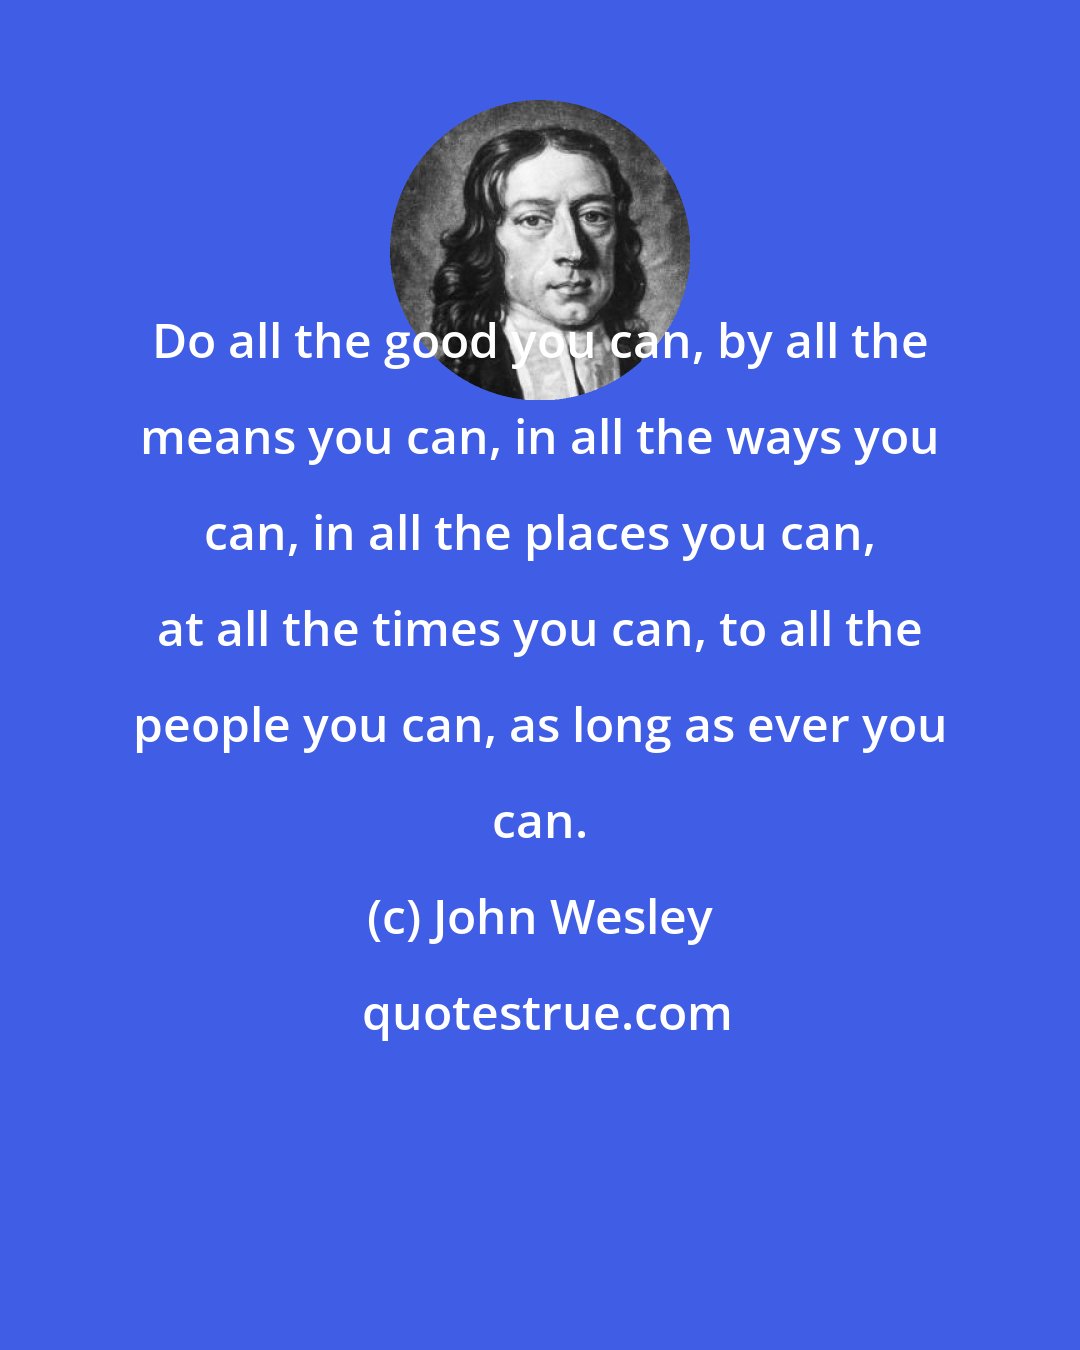 John Wesley: Do all the good you can, by all the means you can, in all the ways you can, in all the places you can, at all the times you can, to all the people you can, as long as ever you can.